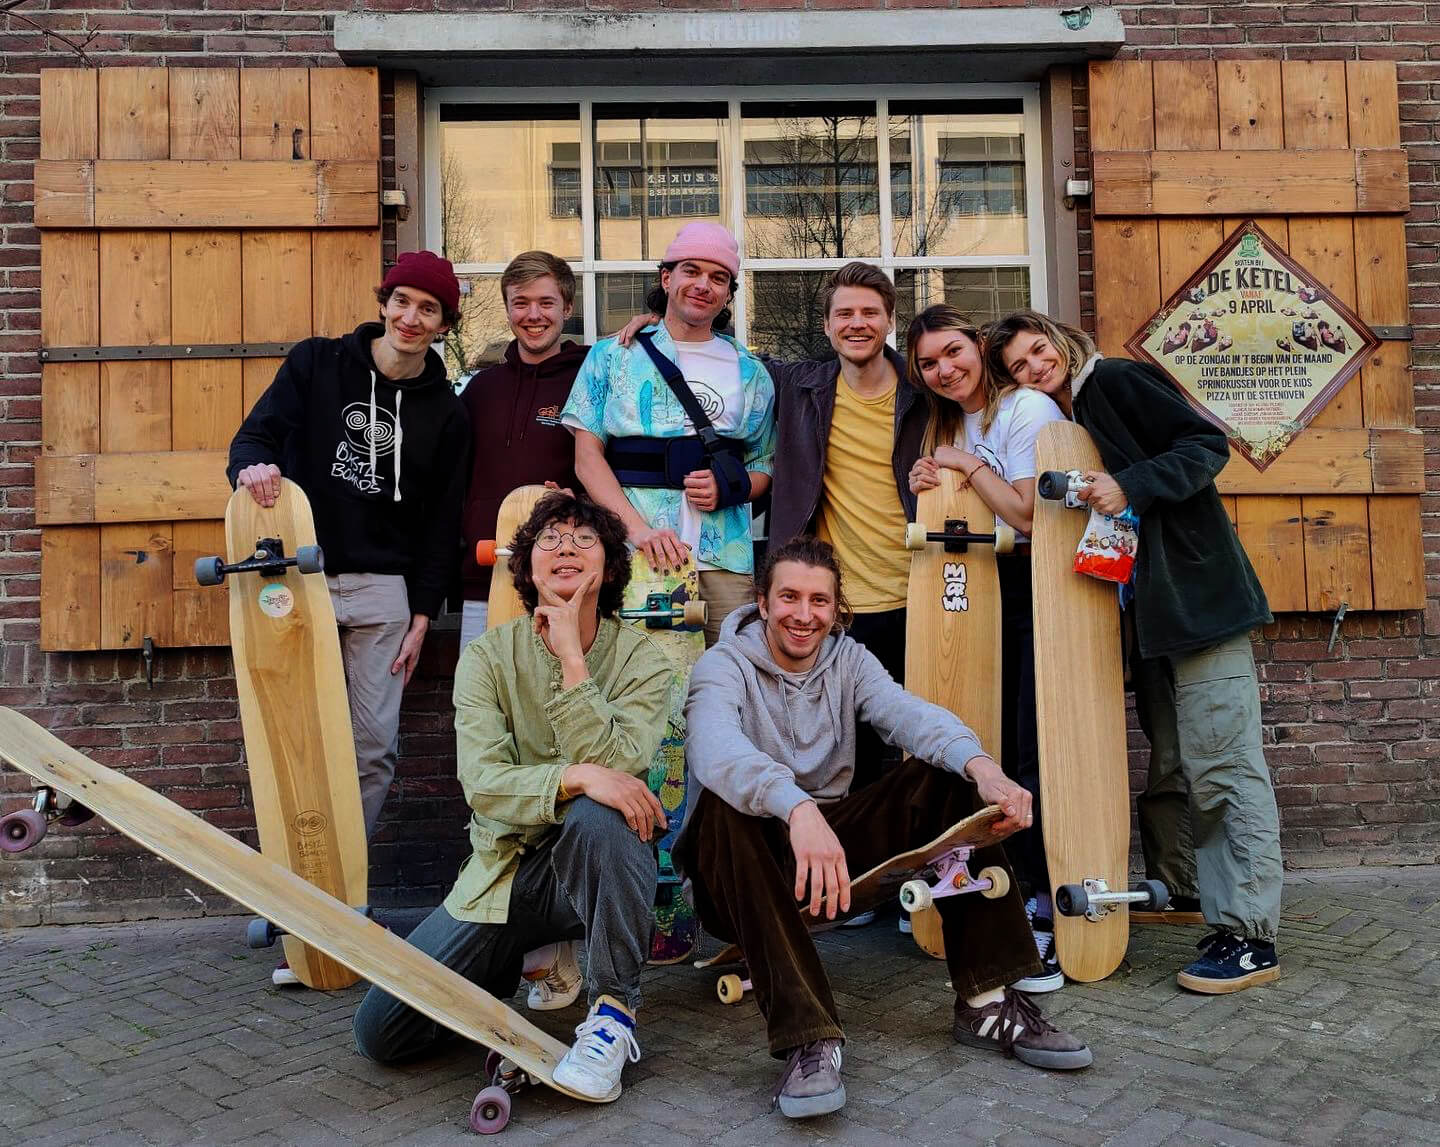 The Bastlboards Team at the SYCLD contest in Eindhoven